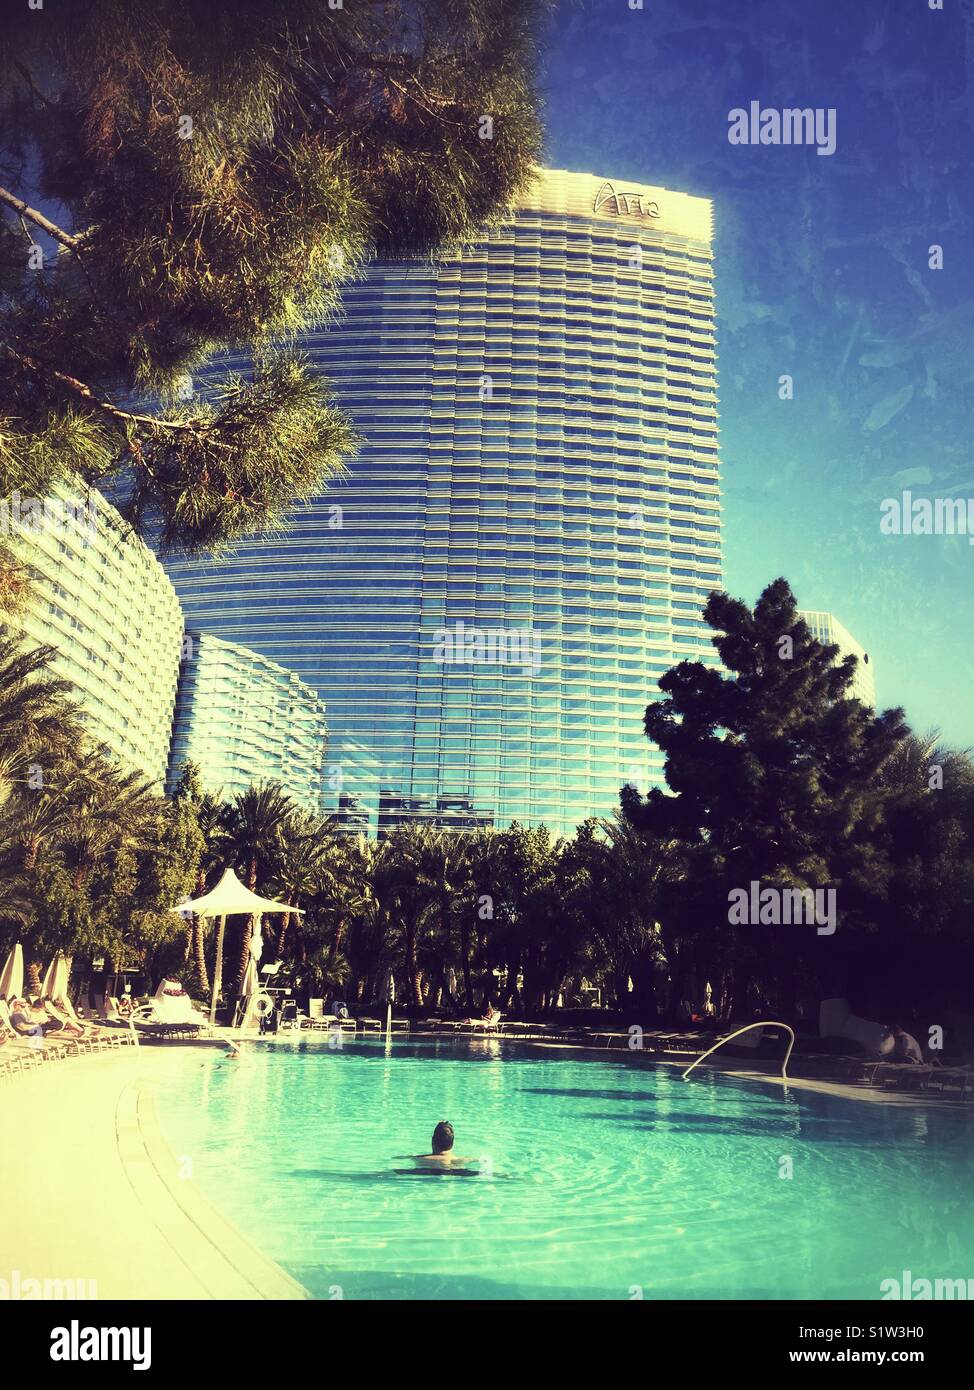 Man swimming in one of the oval heated pools at Aria Resort and Hotel in Las Vegas in December Stock Photo